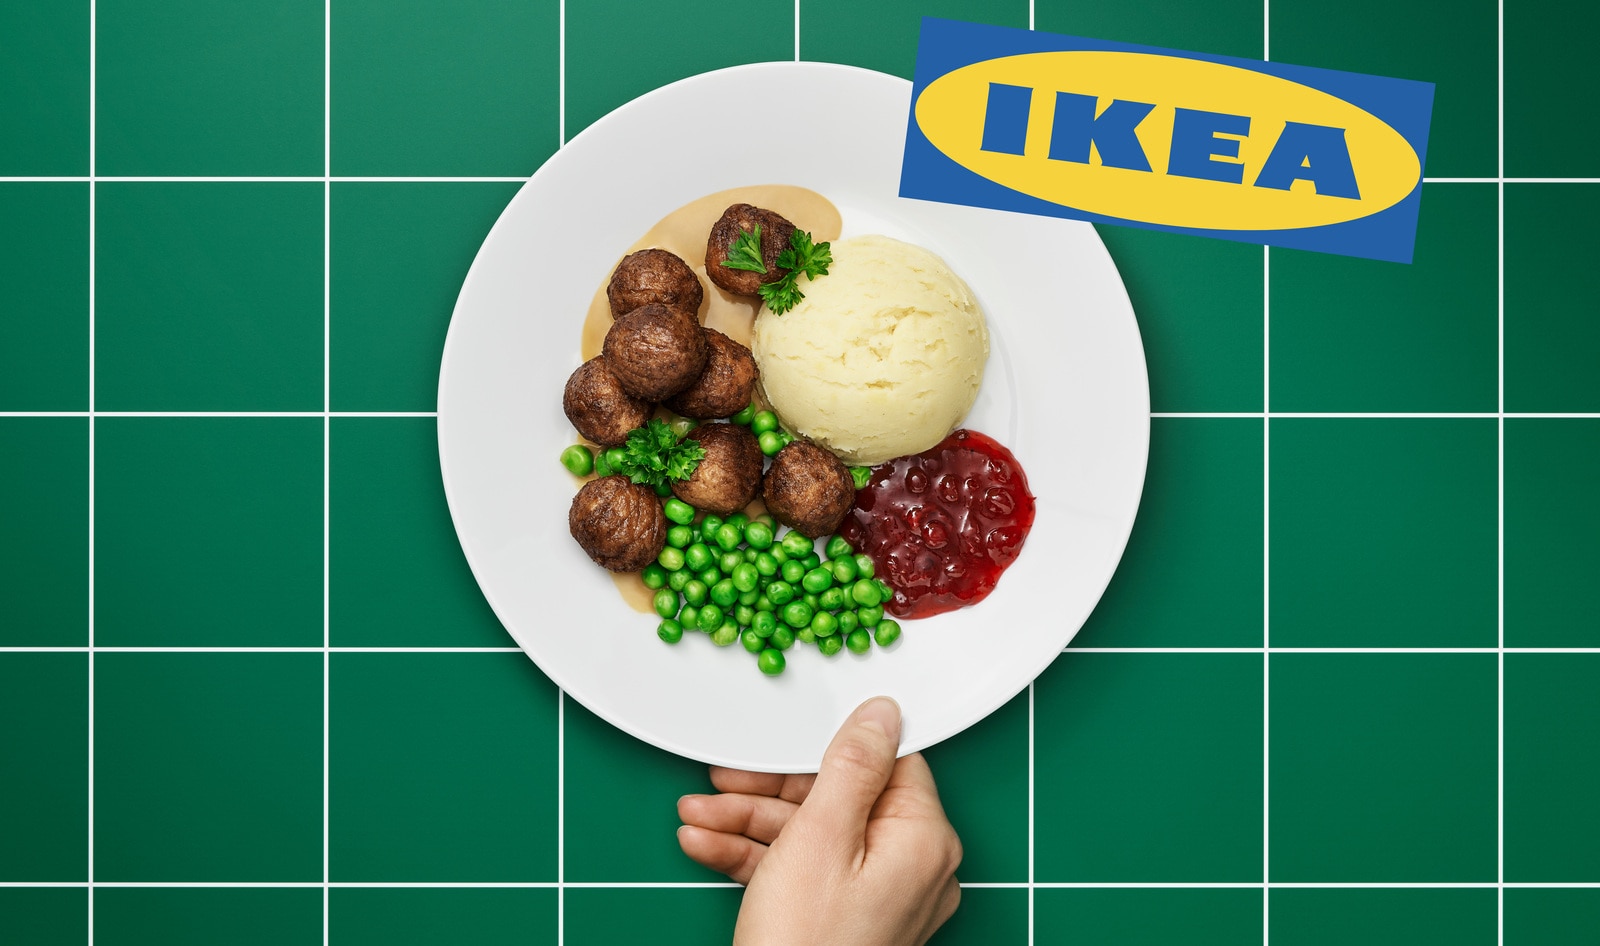 IKEA to Make 50 Percent of Food Menu Plant-Based by 2025